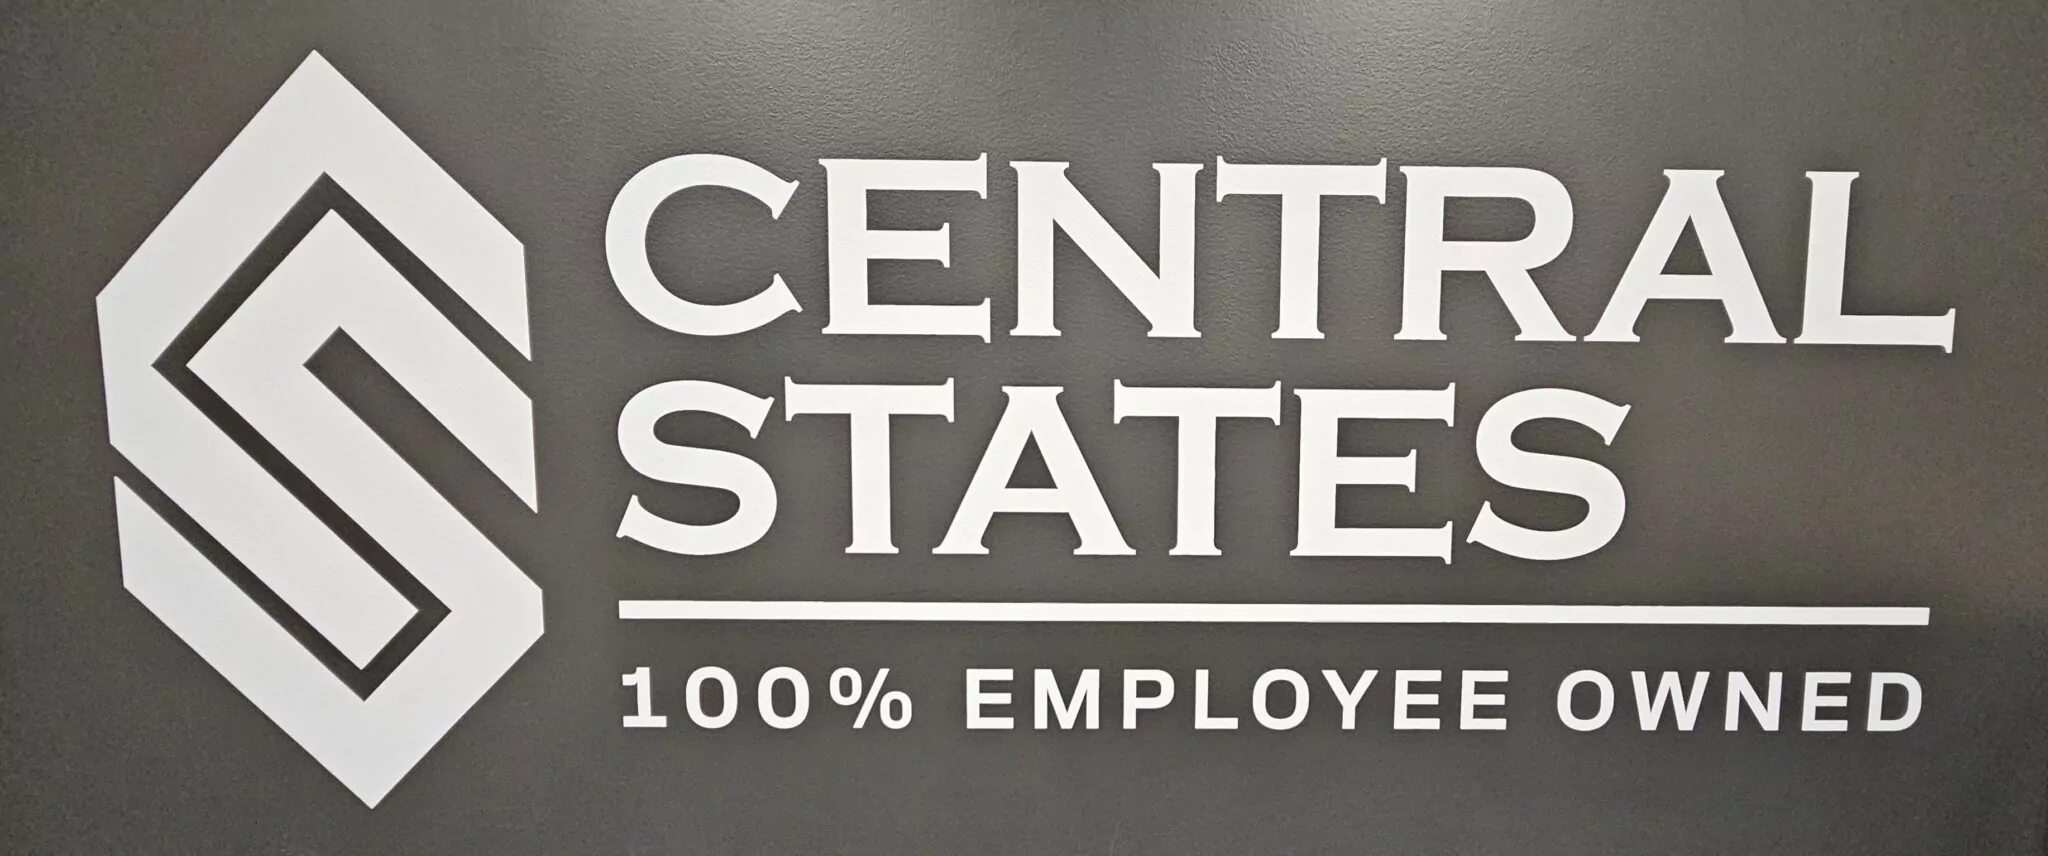 Central States 100% Employee Owned Logo on Wall